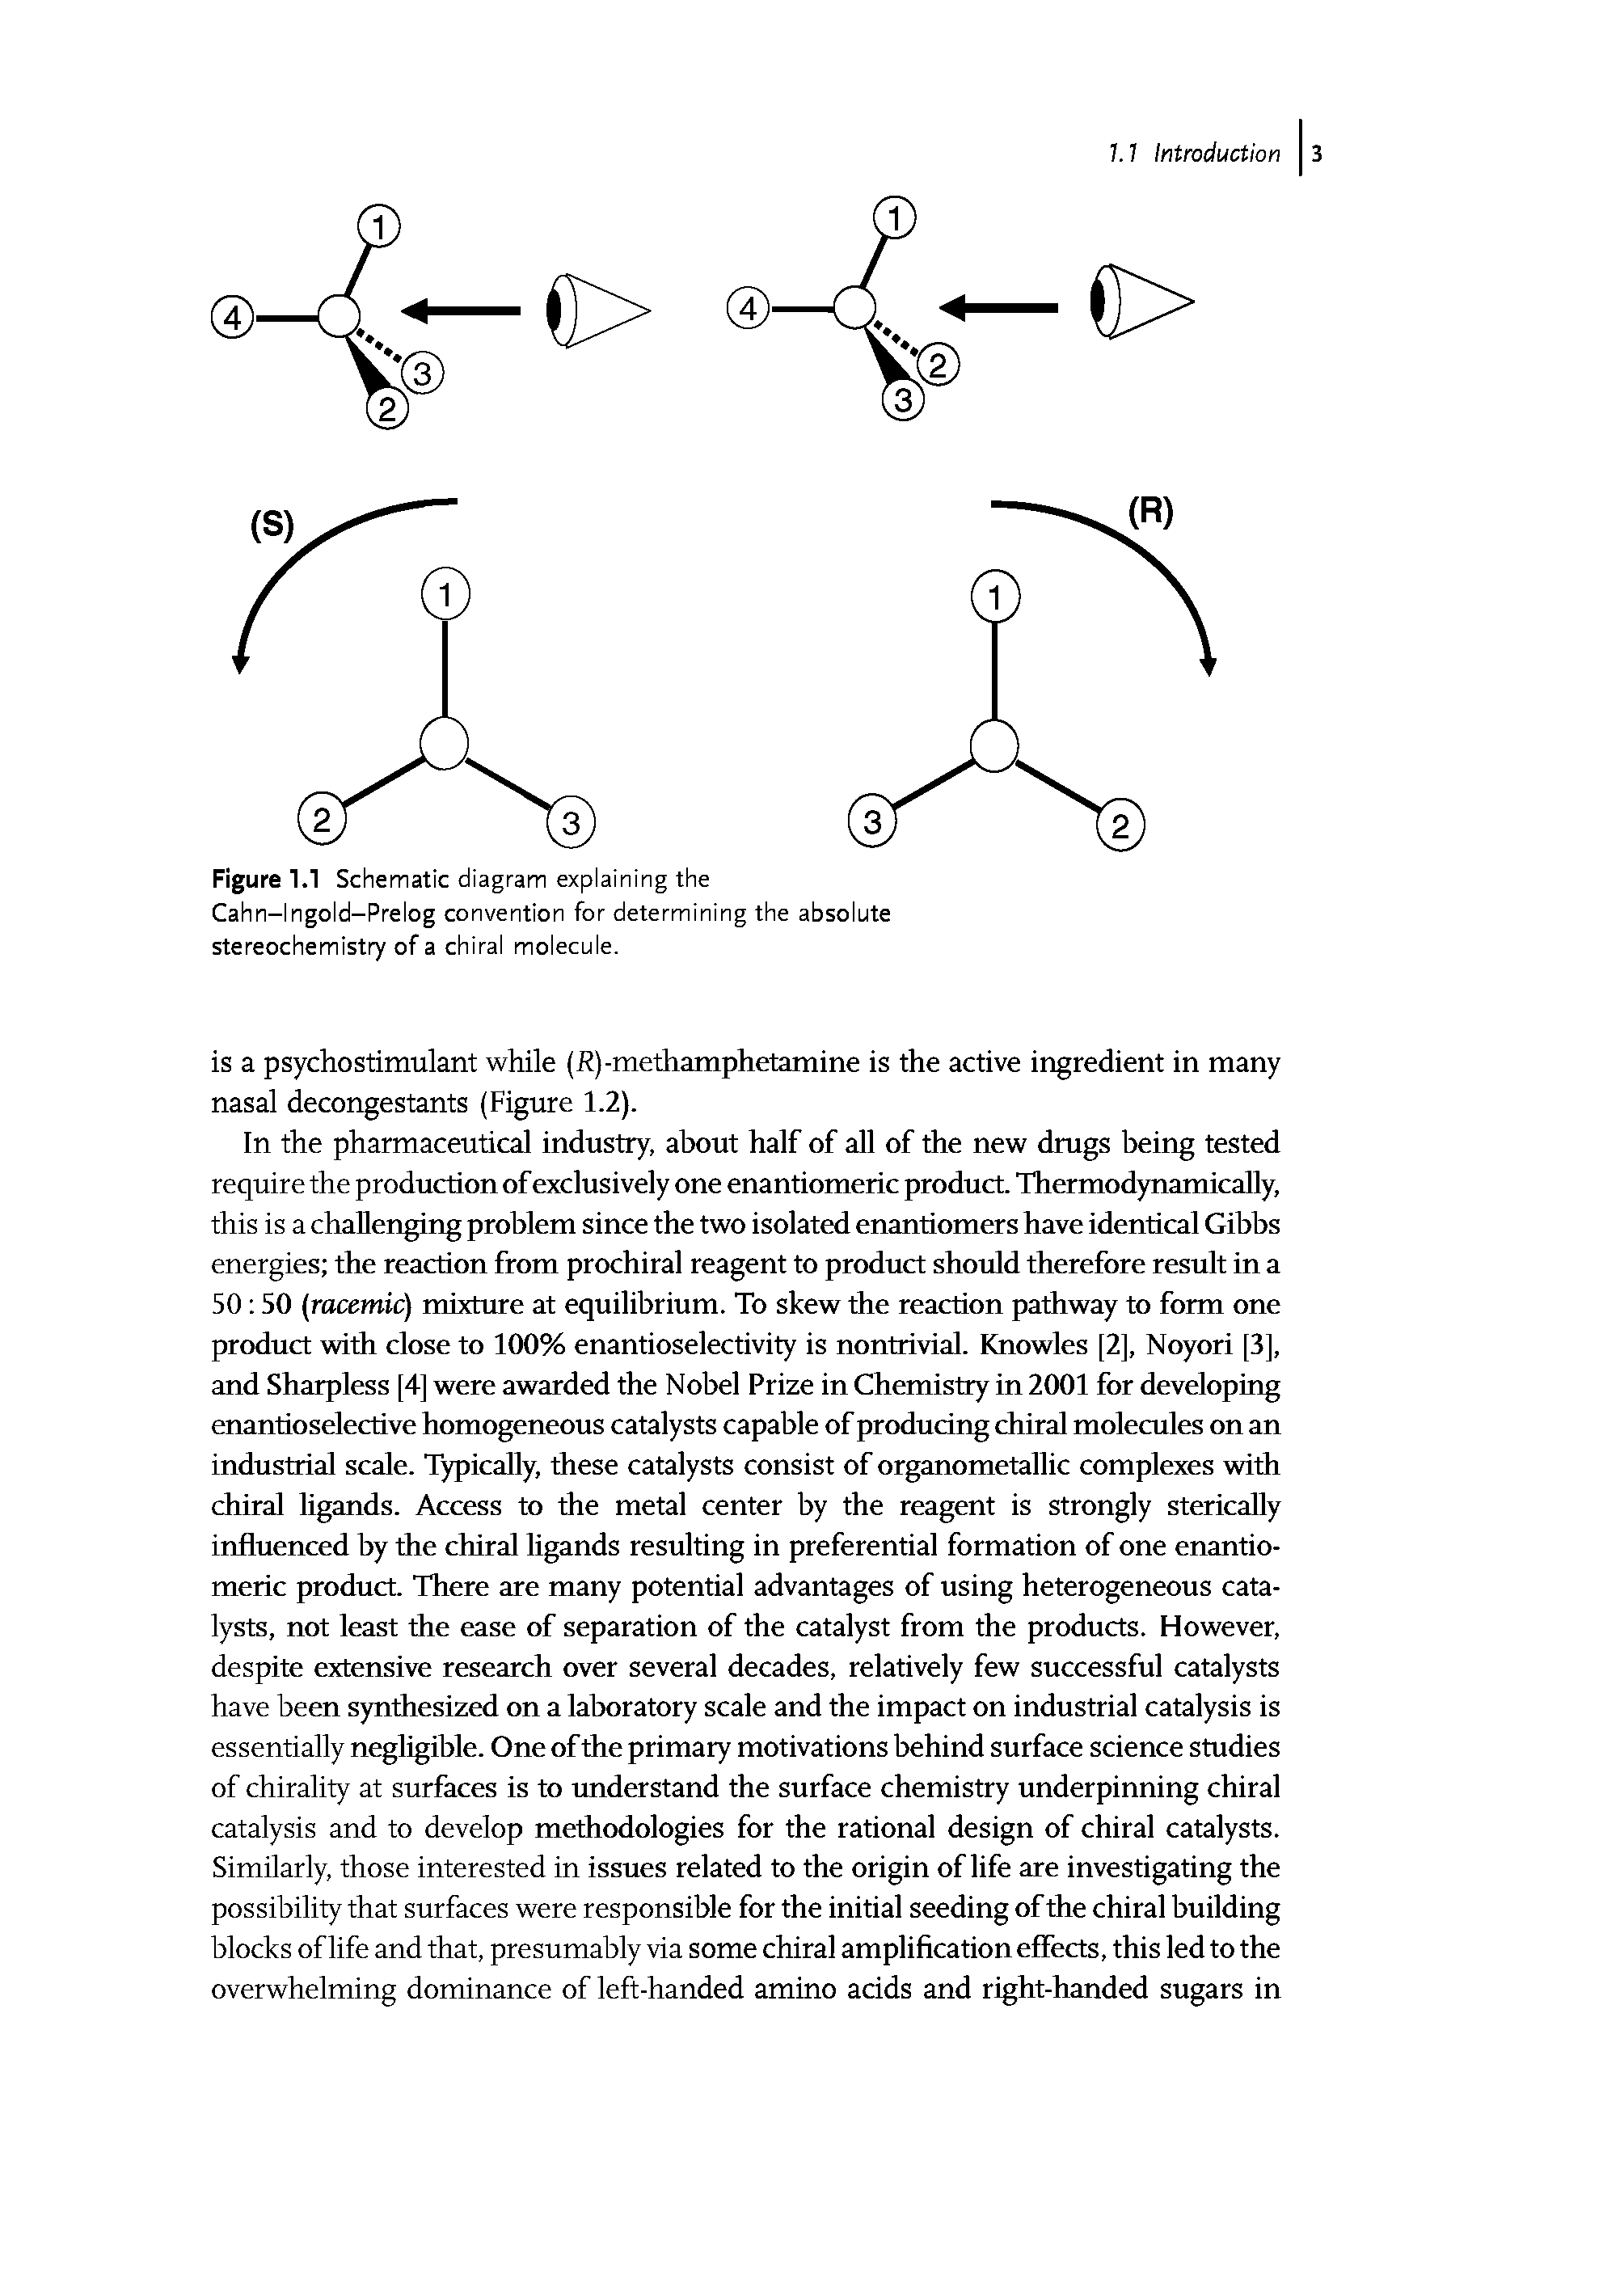 Figure 1.1 Schematic diagram explaining the Cahn-Ingold-Prelog convention for determining the absolute stereochemistry of a chiral molecule.